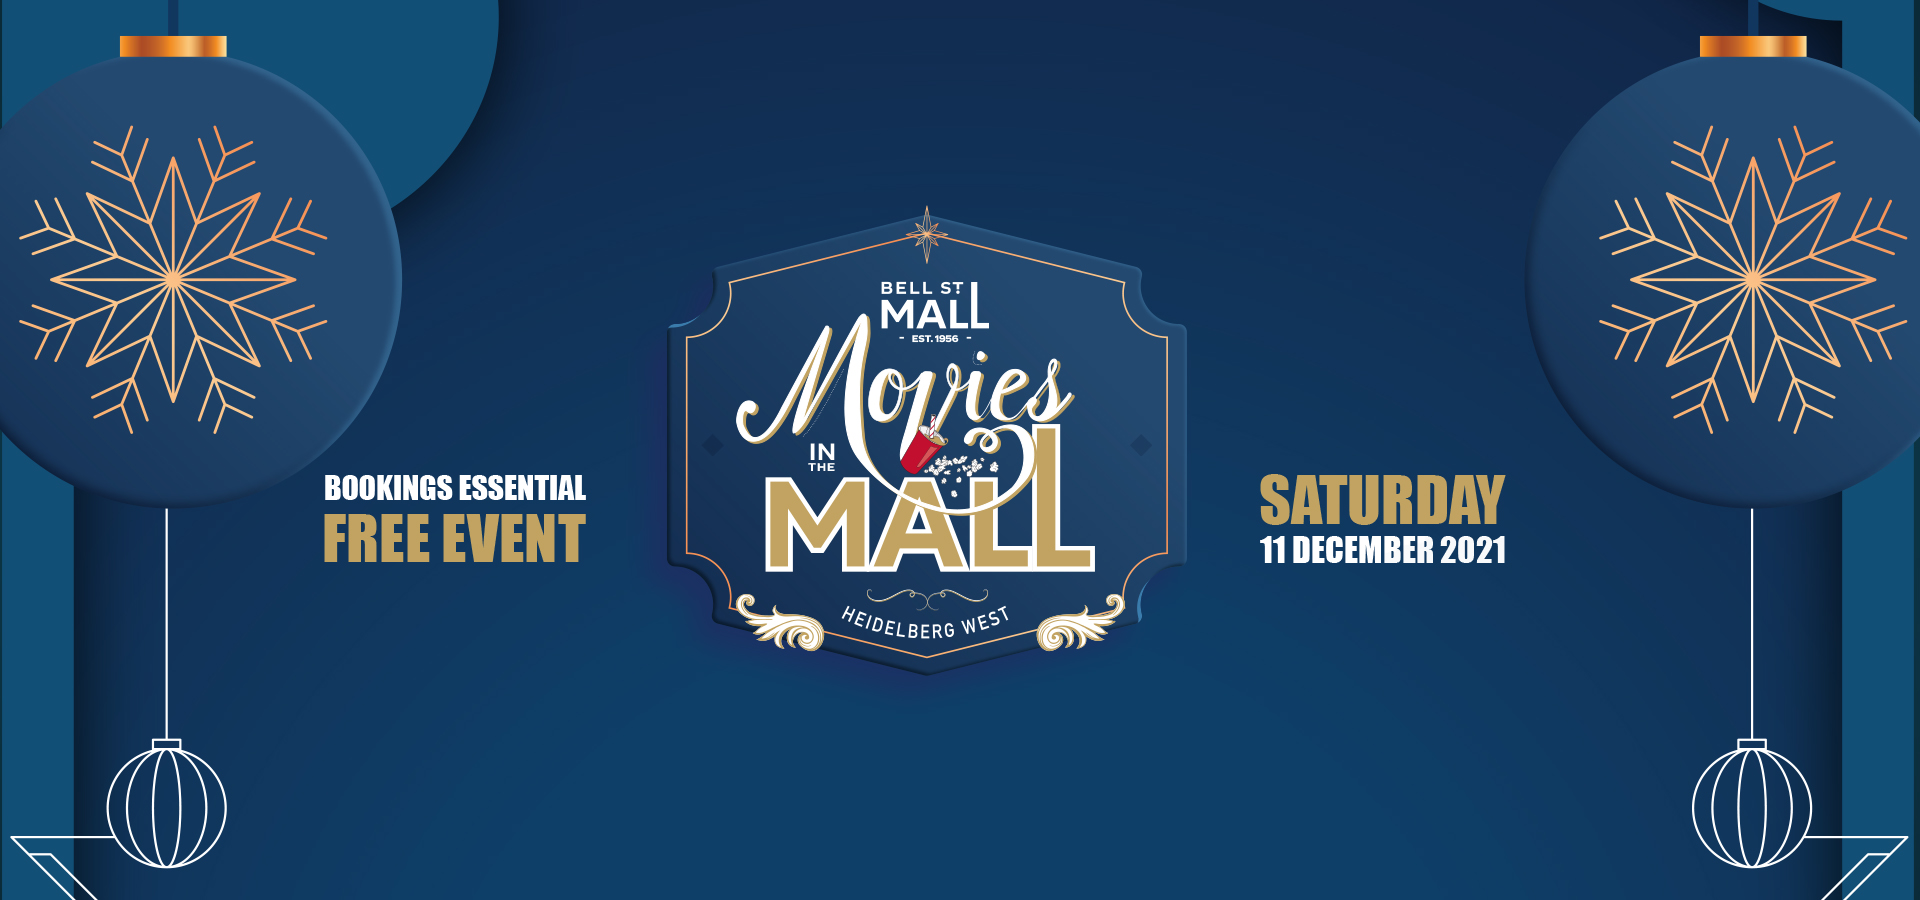 BMT-0070 Christmas Movies at the Mall-Home Banner-v2